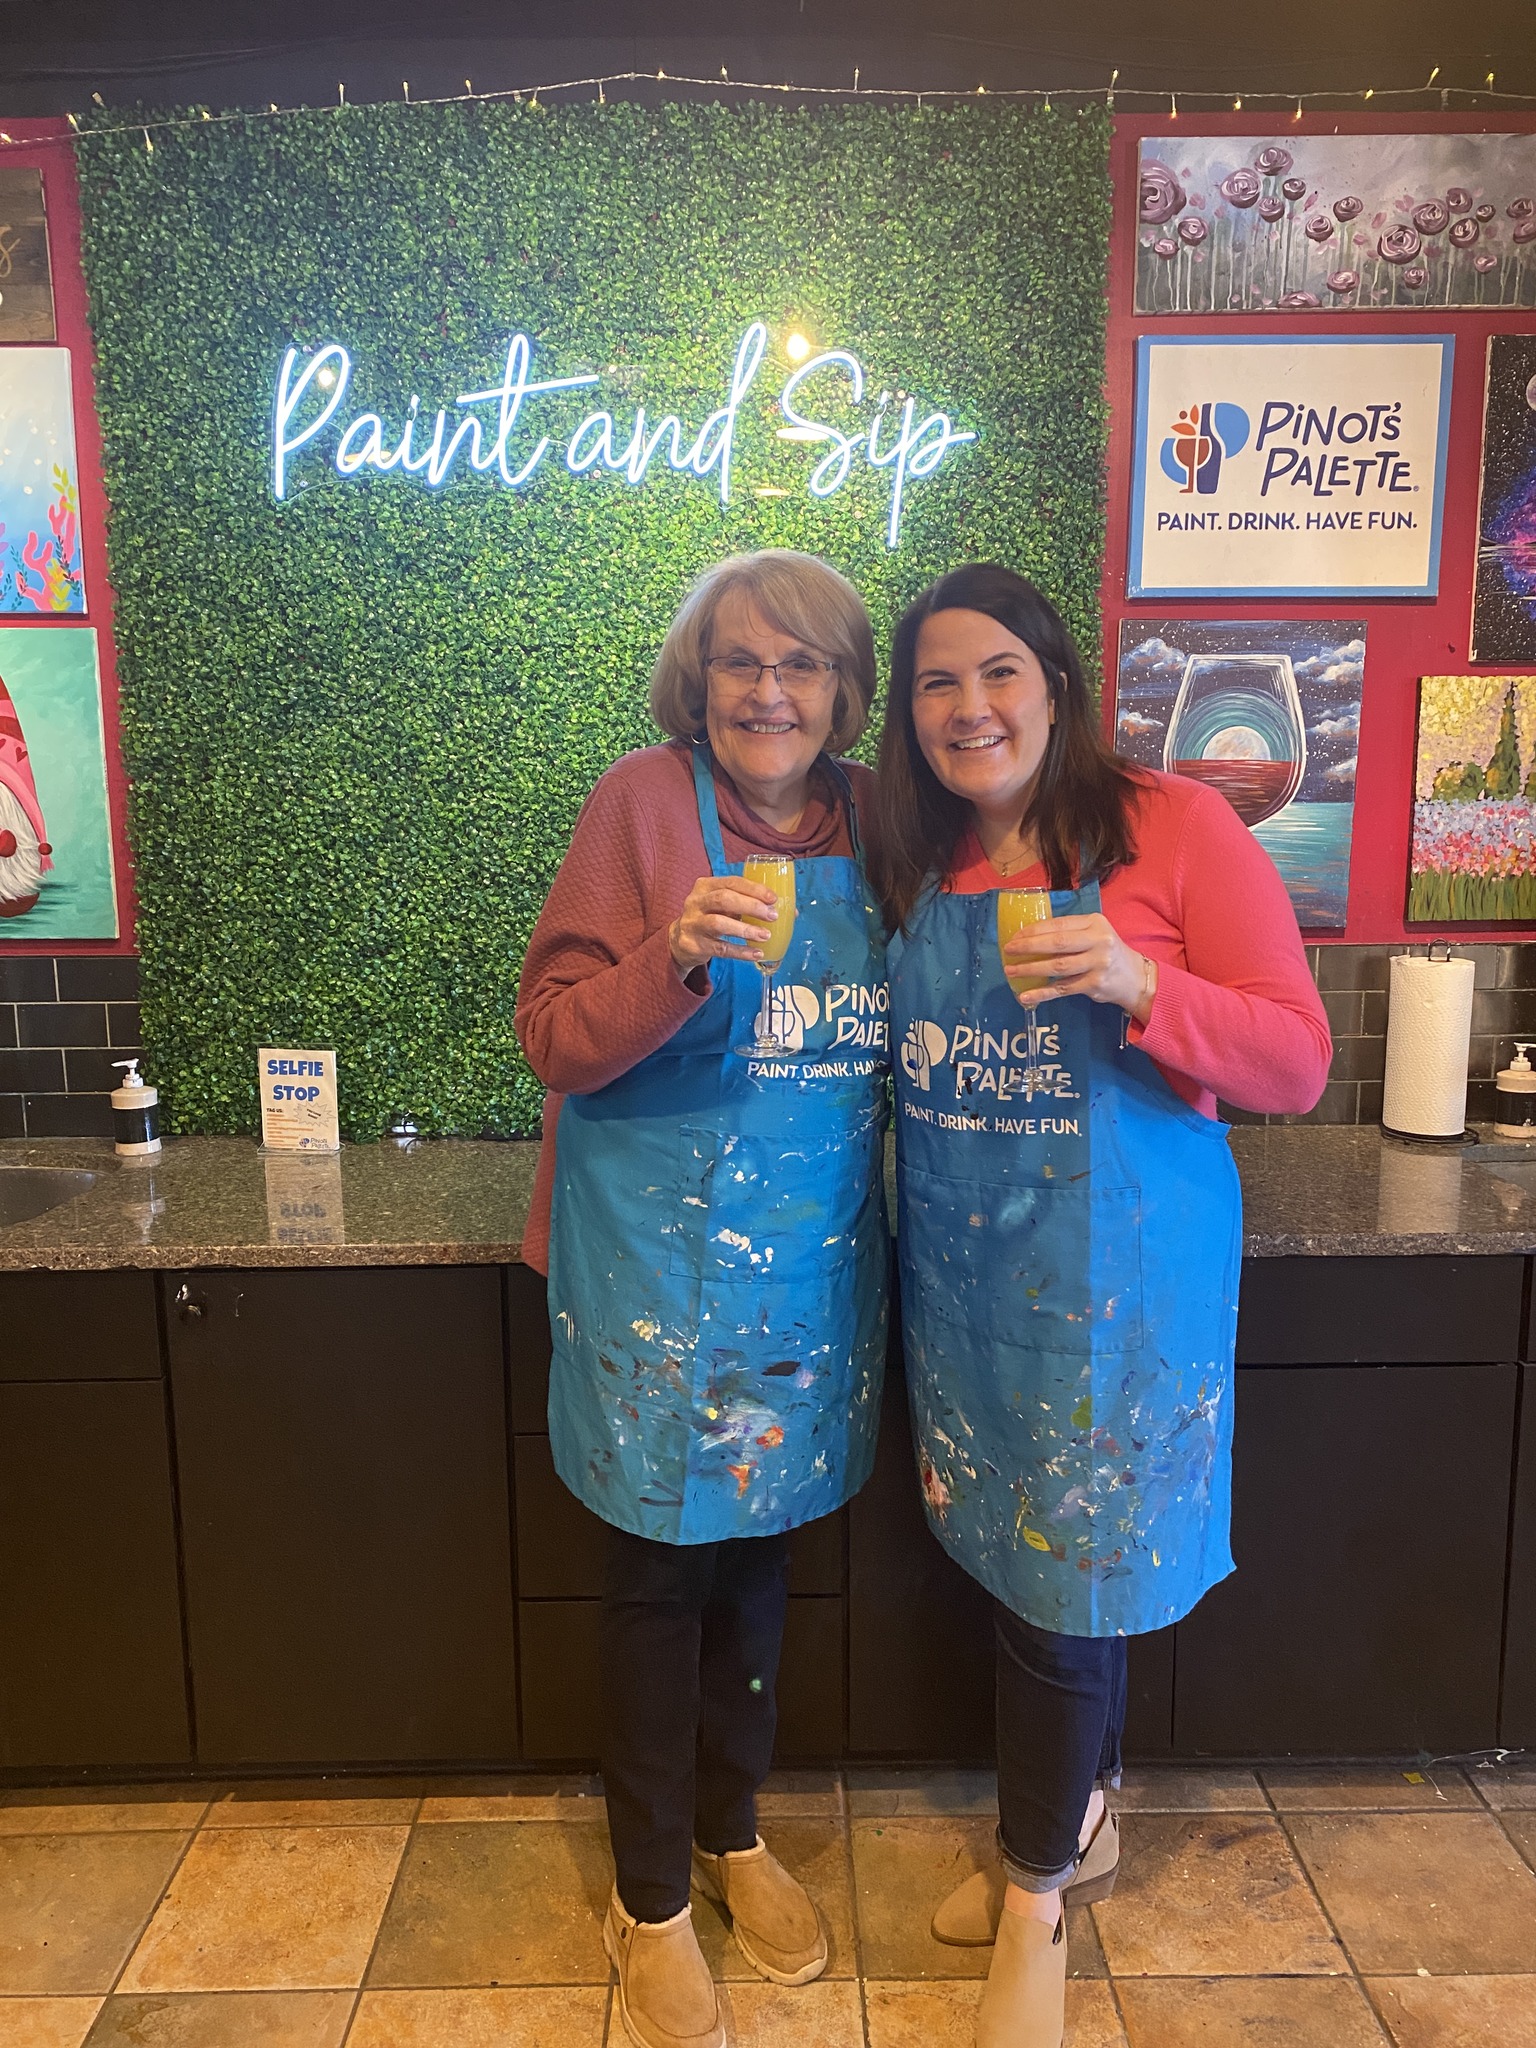 What Is A Paint & Sip Class All About?